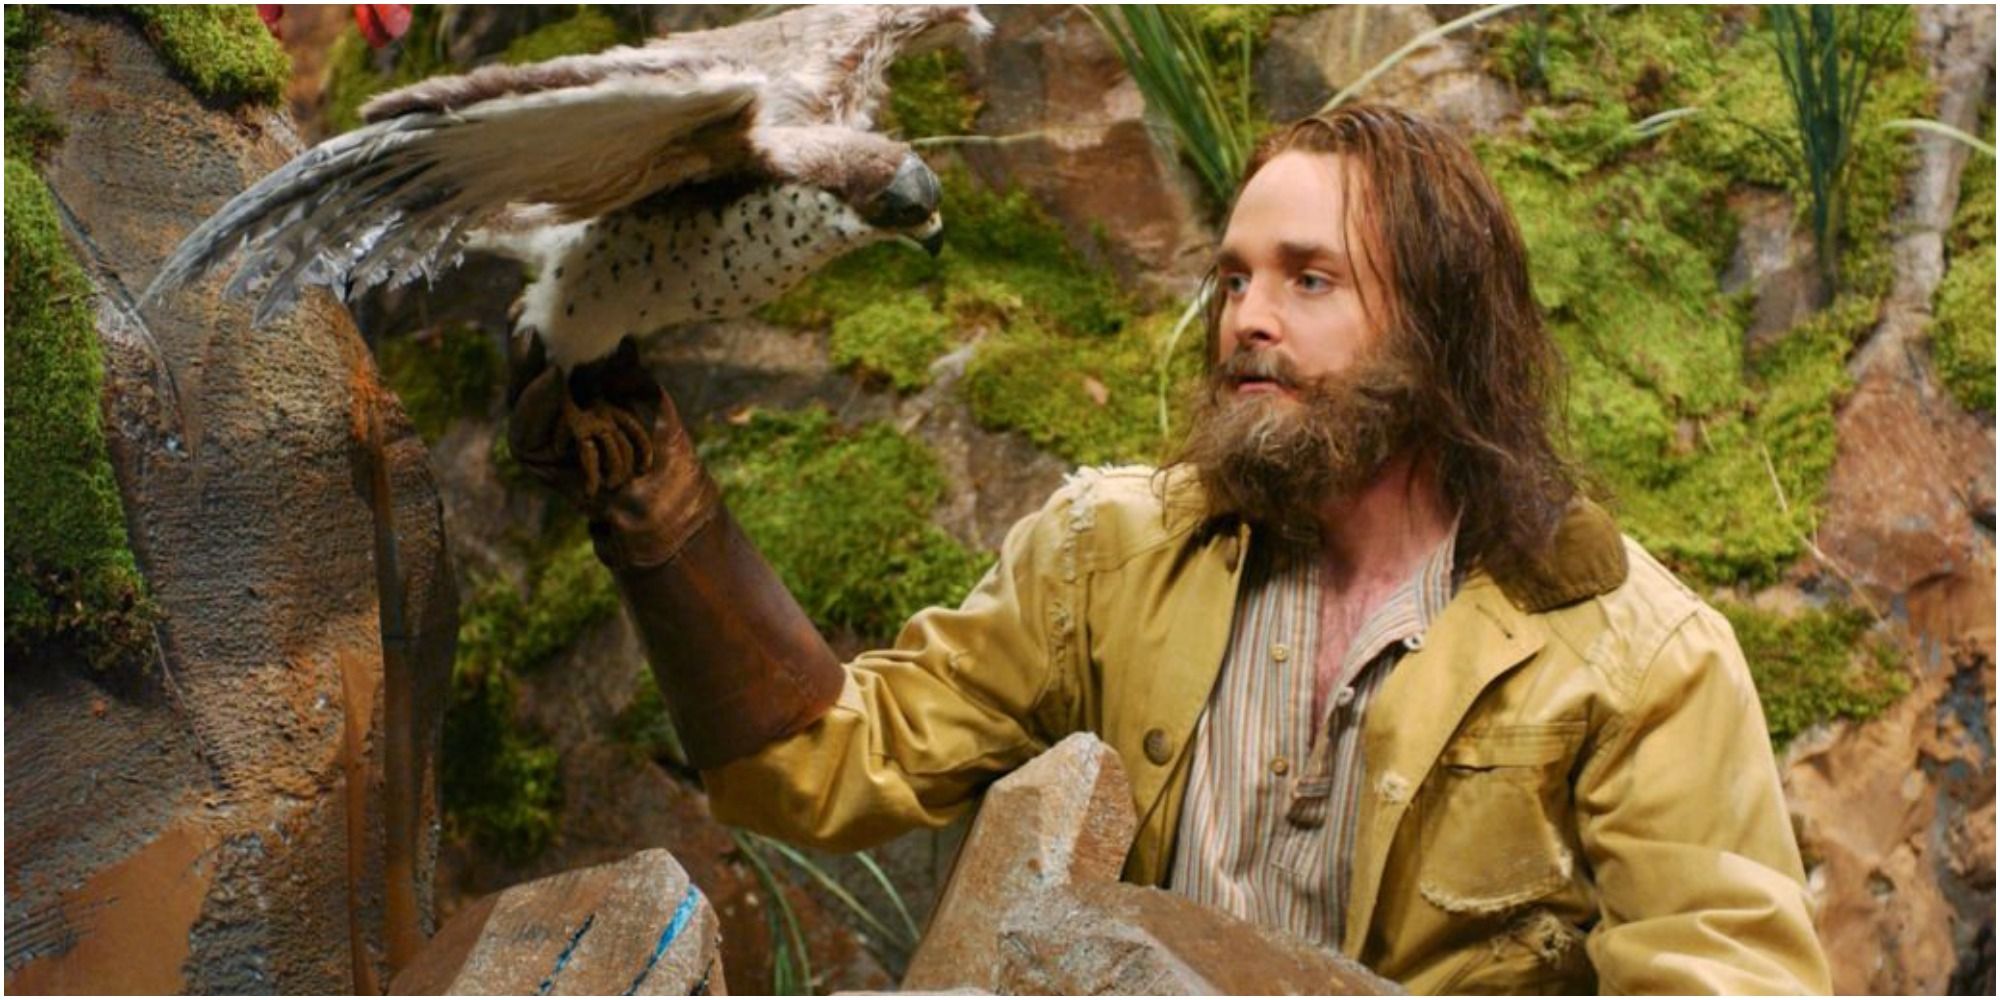 A screenshot of Will Forte's The Falconer with his falcon friend Donald in Saturday Night Live